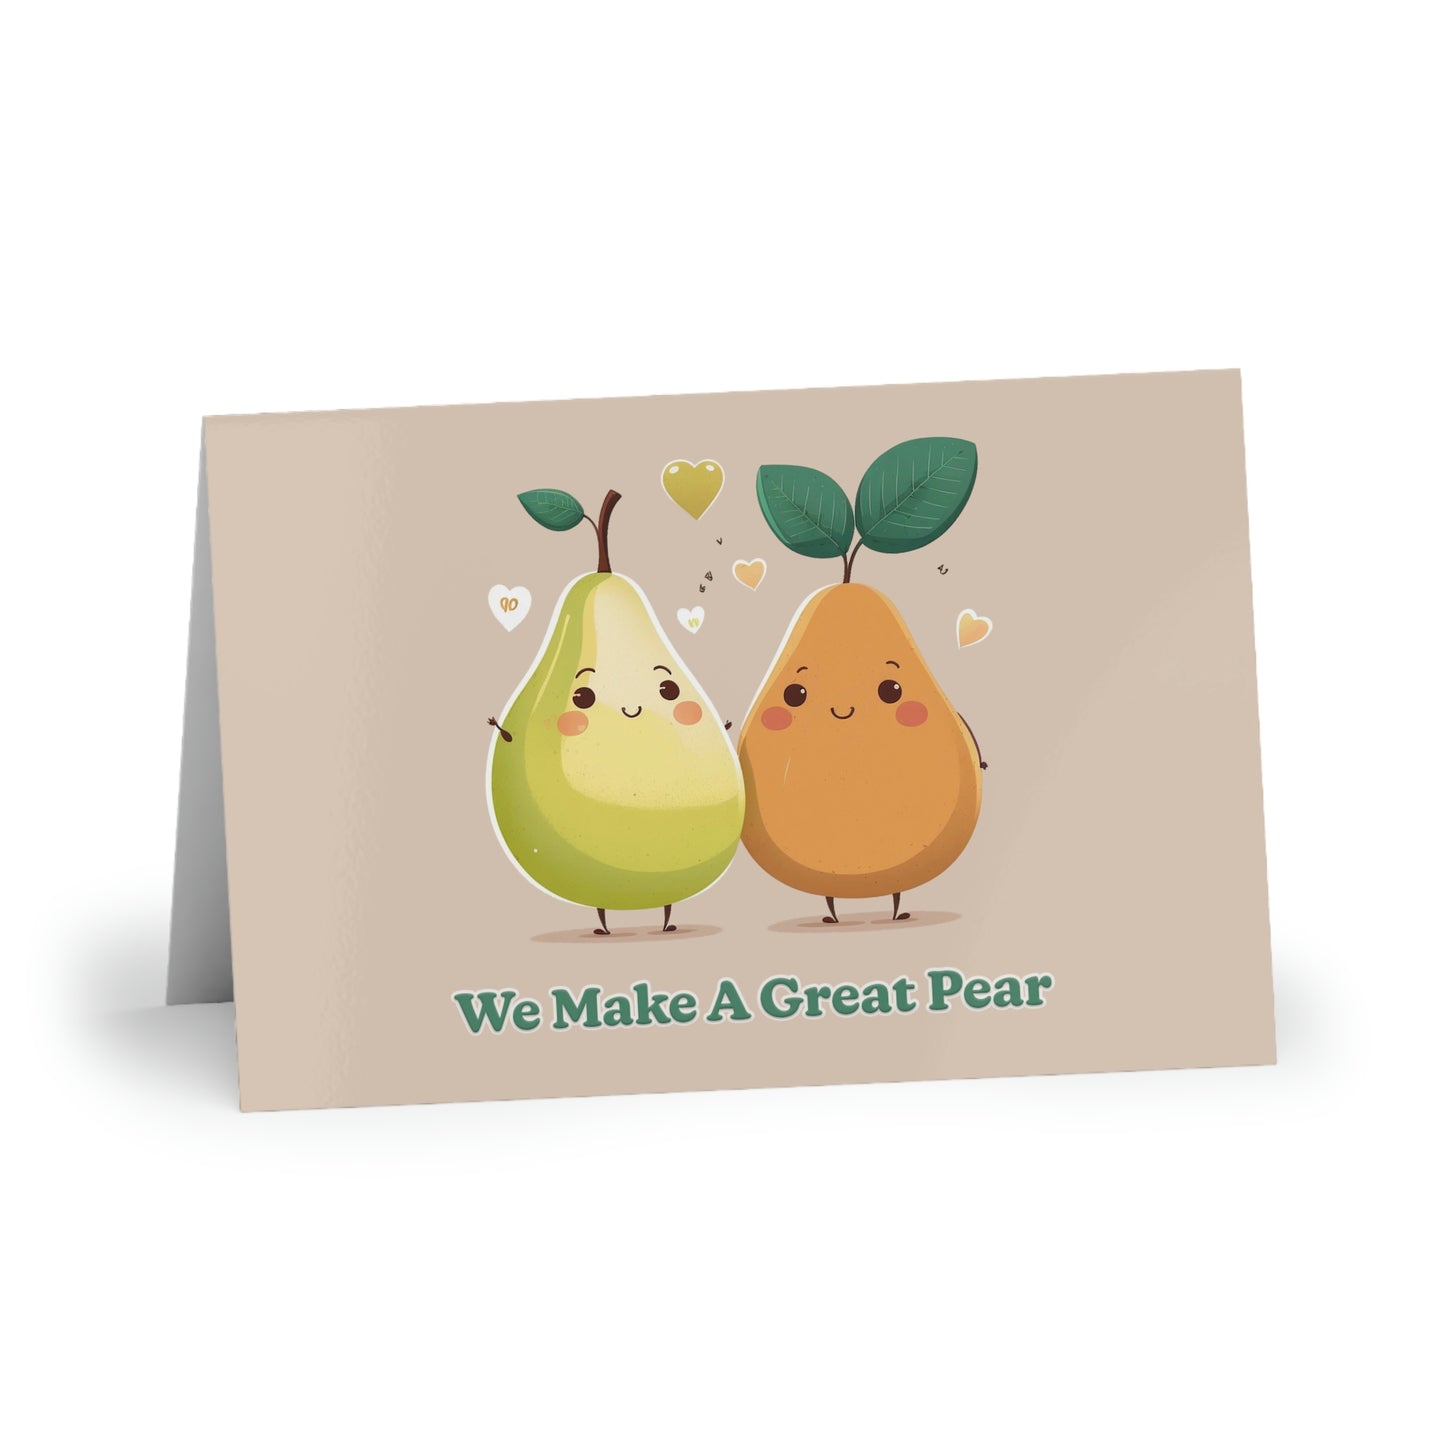 We Make A Great Pear Greeting Cards (1 or 10-pcs)